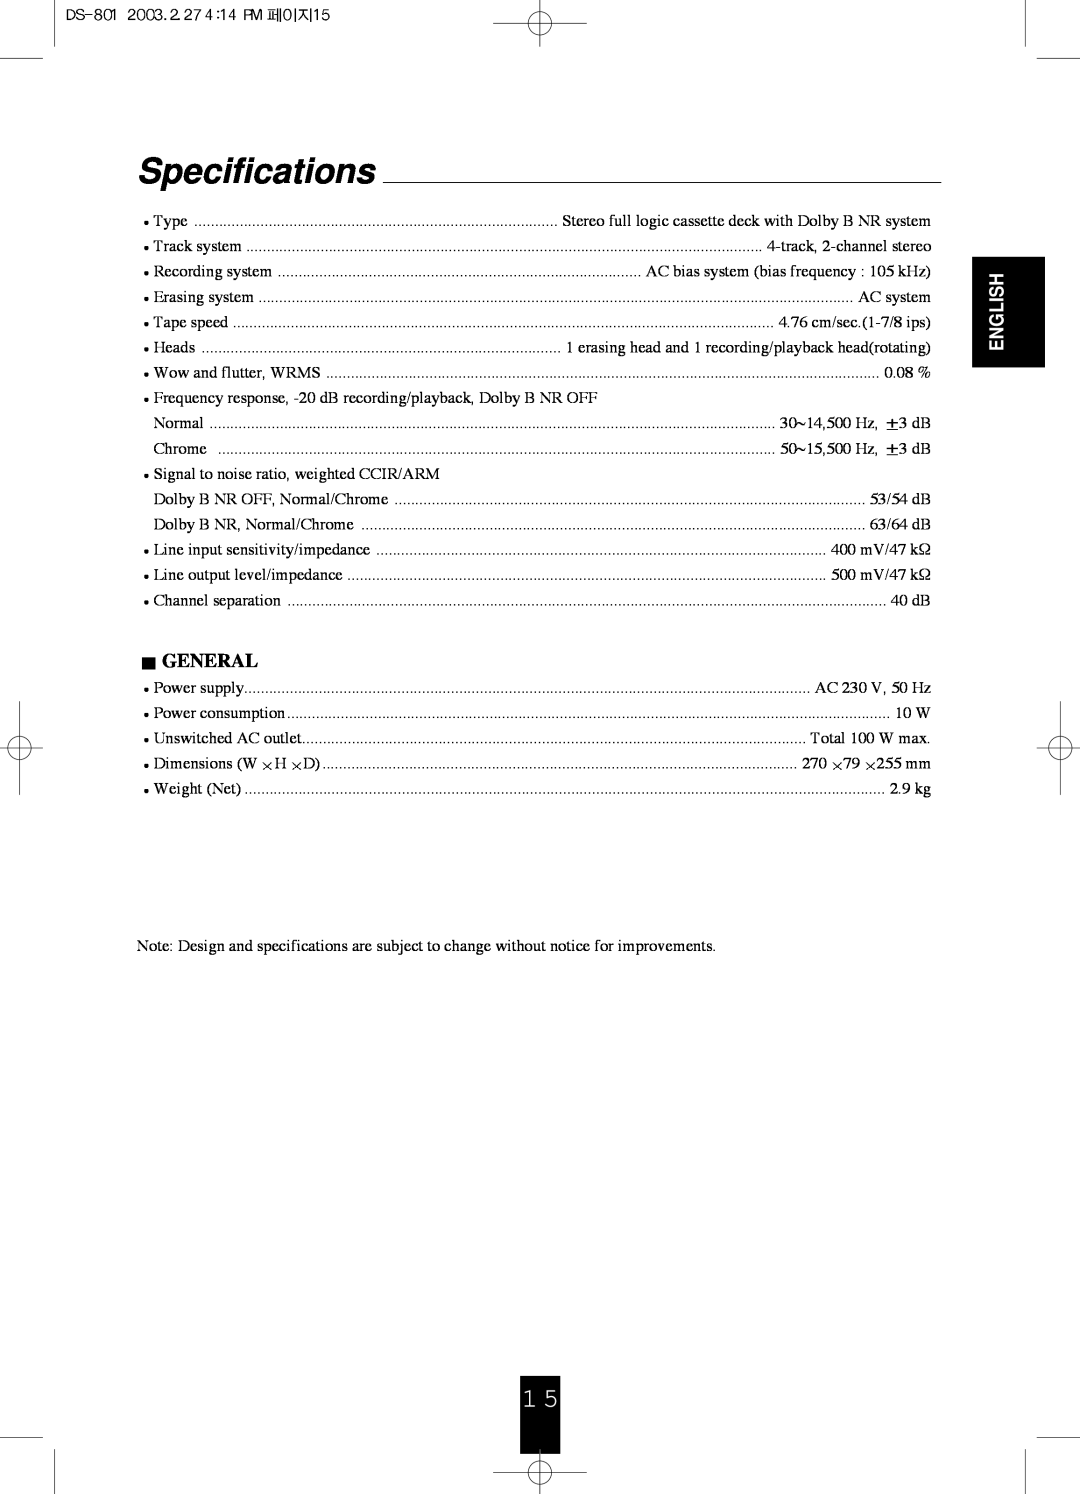 Sherwood DS-801 manual Specifications, General, English 